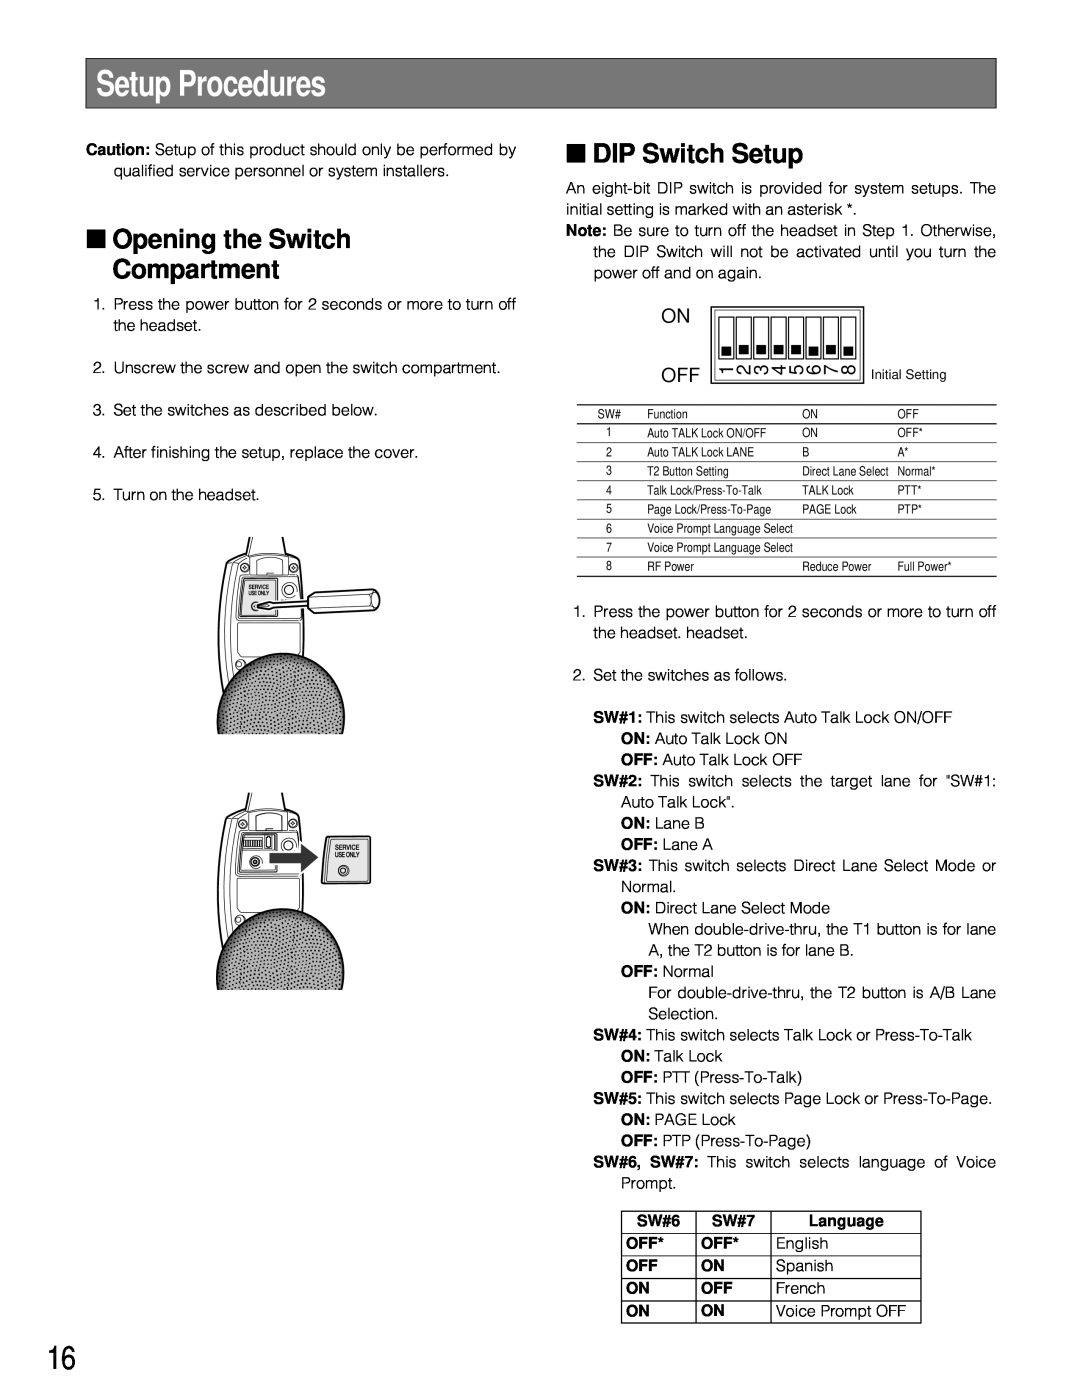 Technics WX-H3050 manual Setup Procedures, Opening the Switch Compartment, DIP Switch Setup, 1 2 3 